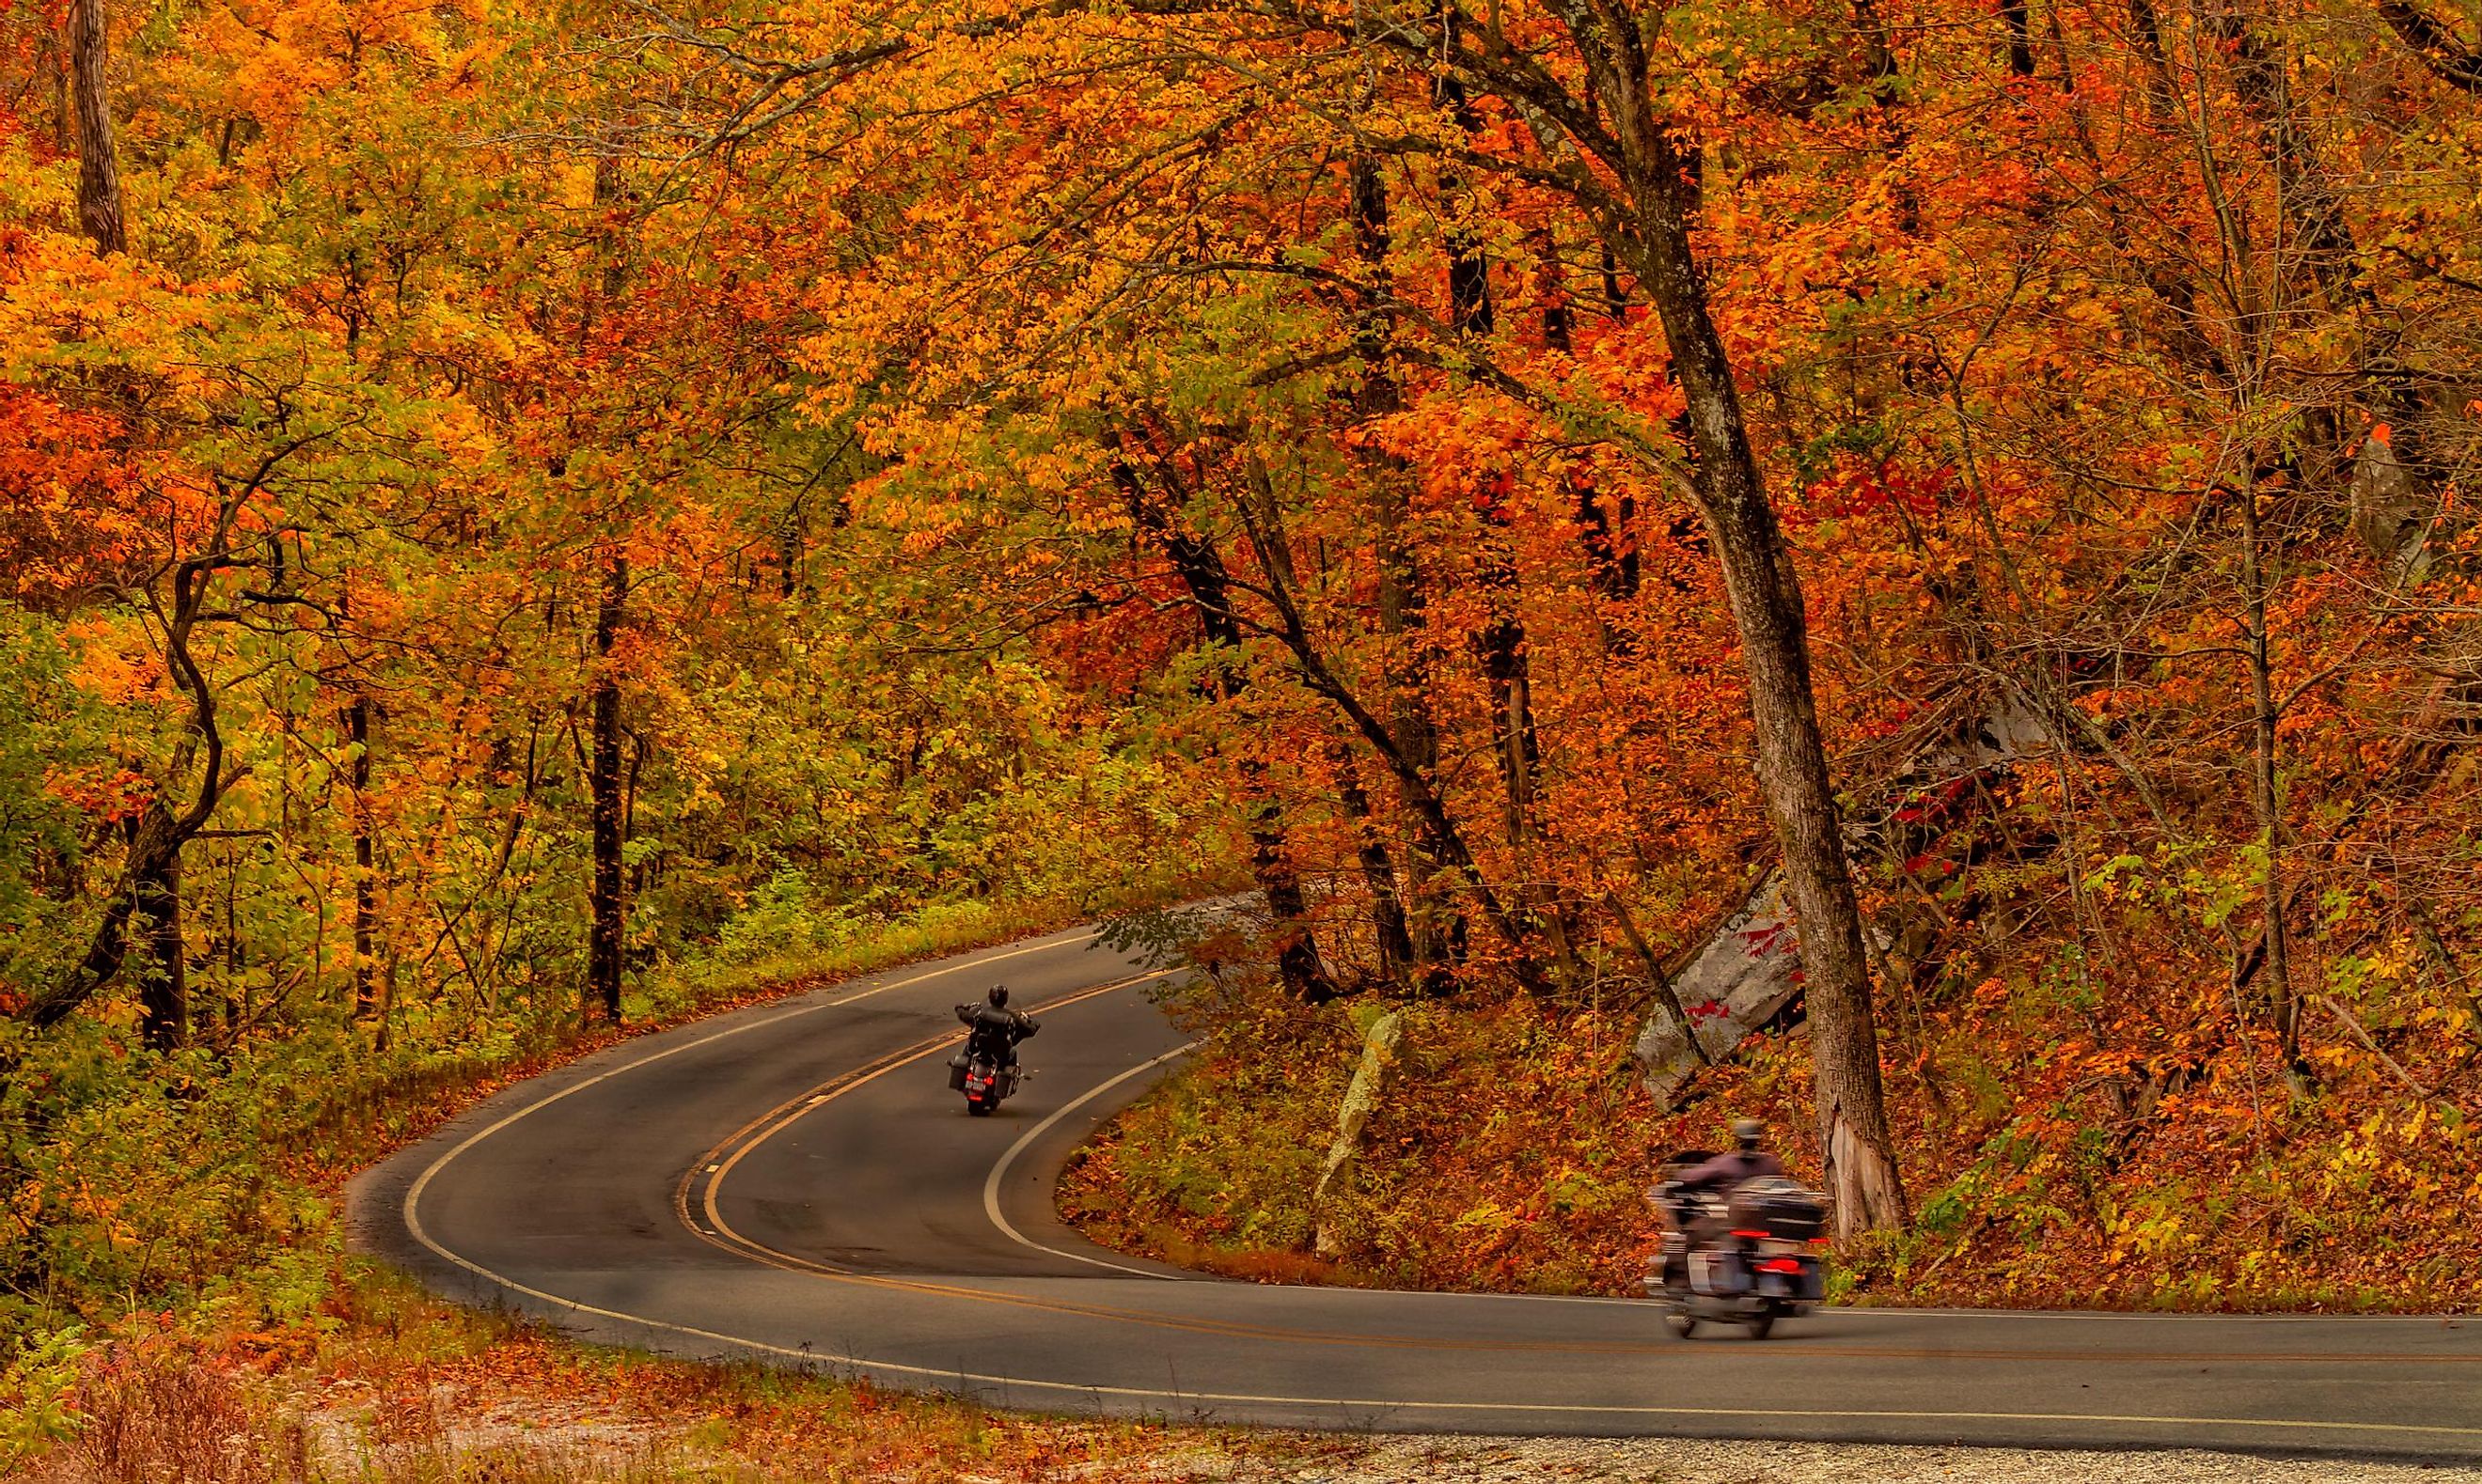 Arkansas-Pig Tail National Scenic Byway